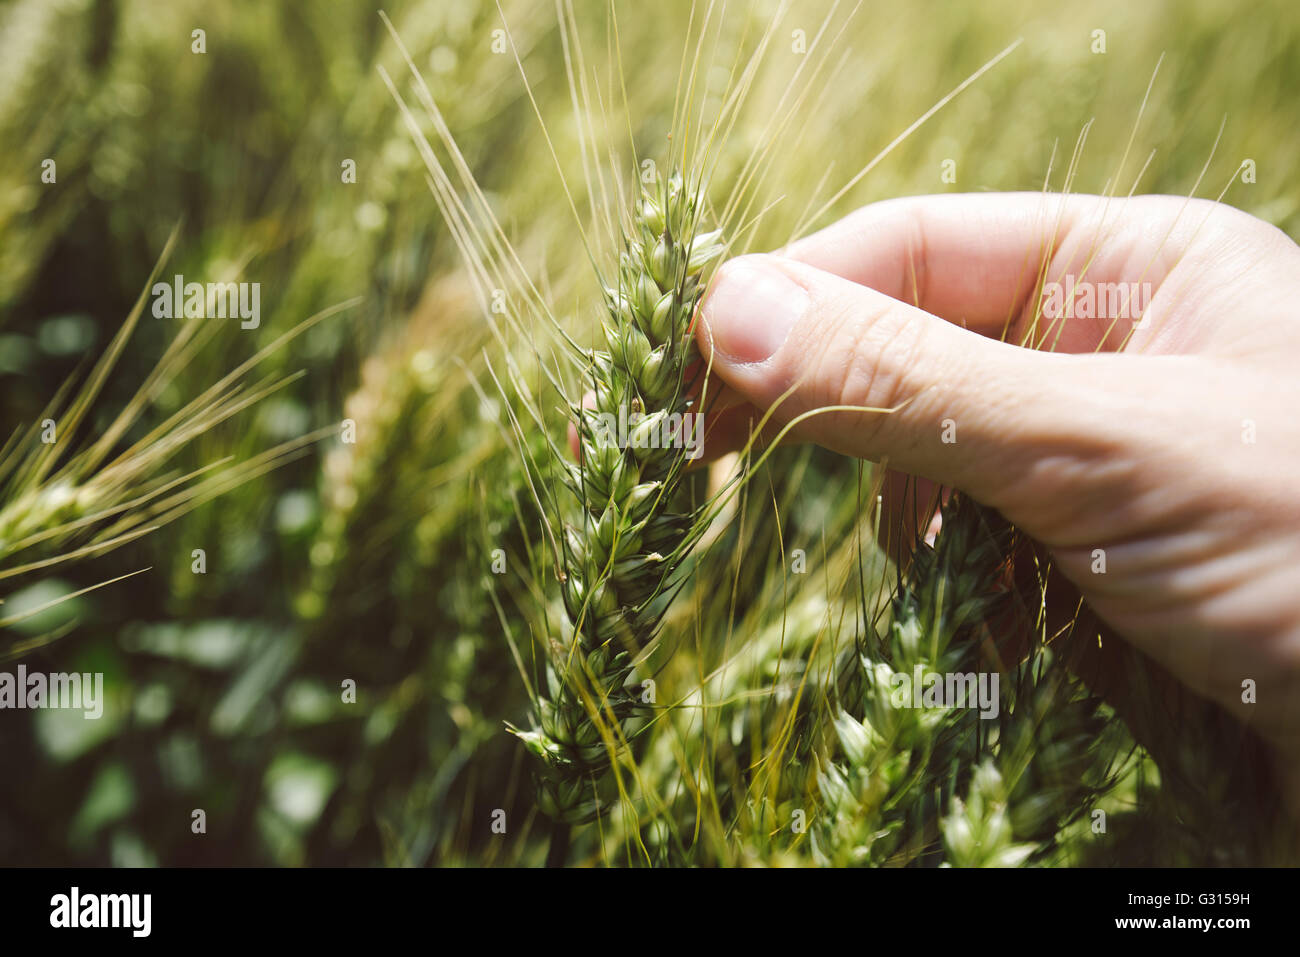 Hand in wheat field, close up of fingers holding cereal crop plant Stock Photo